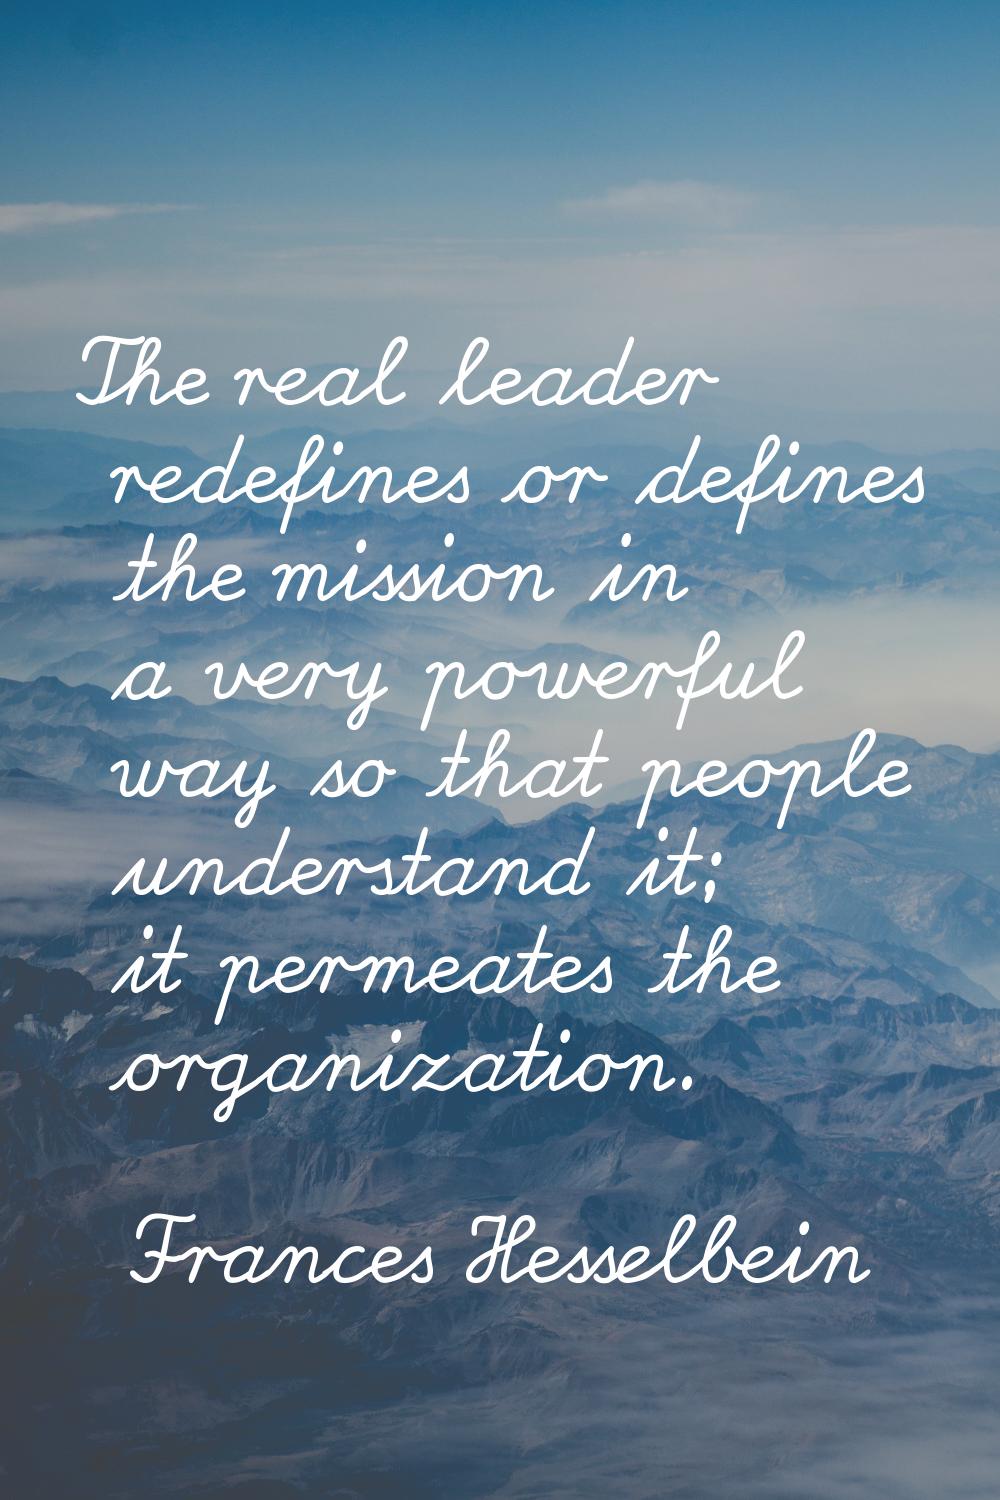 The real leader redefines or defines the mission in a very powerful way so that people understand i